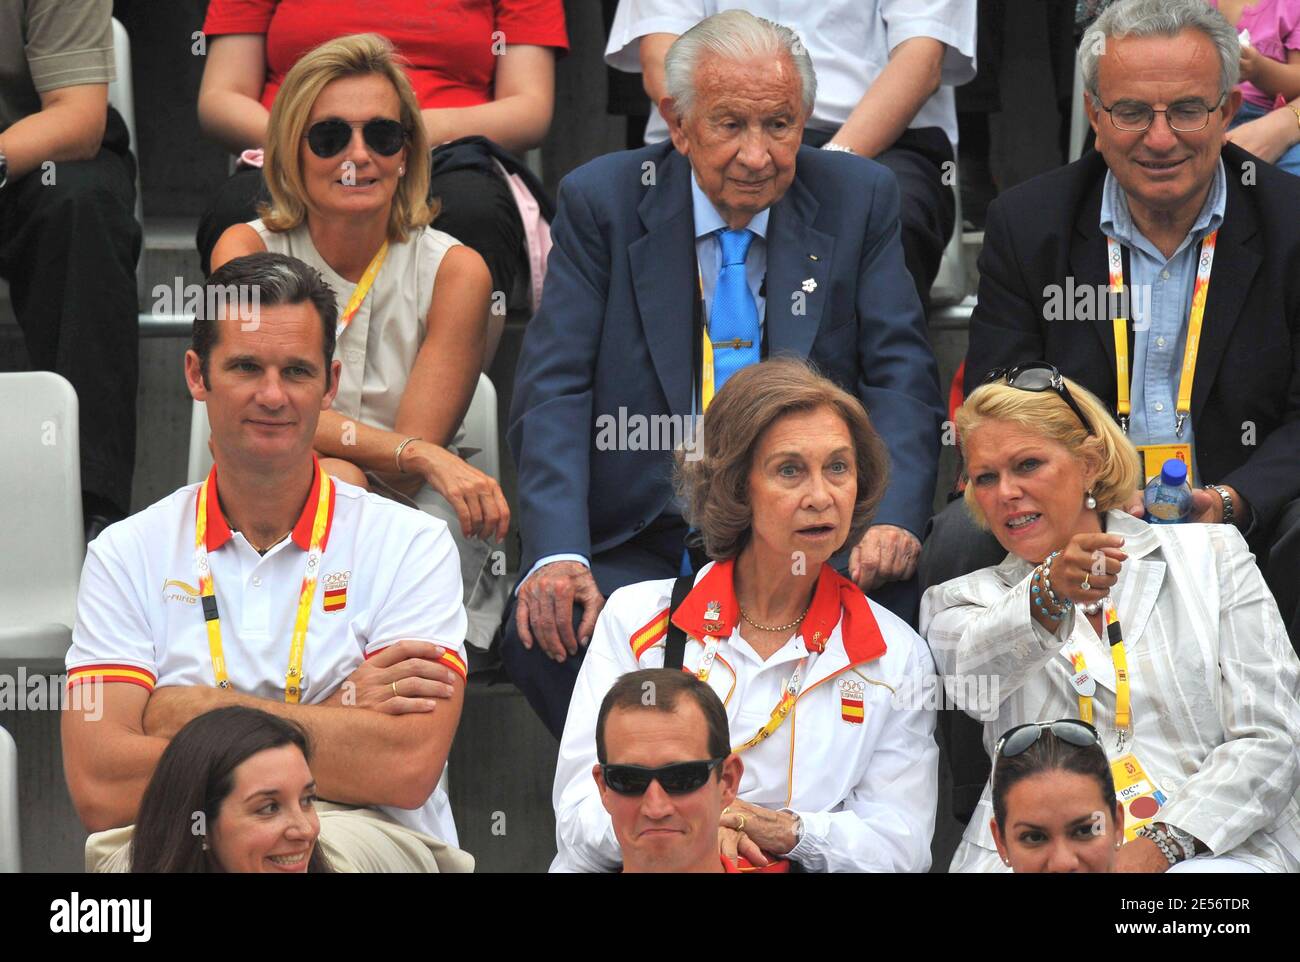 Spain's Queen Sofia, Princess Cristina of Spain with her husband Inaki Urdangarin, Bruno Gomez Acebo of Borbon and his girlfriend Barbara Cano De La Plaza, Juan Antonio Samaranch and Grand Duke Henri of Luxembourg attend the Men's Final tennis match, Spain's Rafael Nadal vs Chile's Fernando Gonzalez at the Olympic Green Tennis Center on Day 9 of the Beijing 2008 on August 17, 2008. Photo by Jean-Michel Psaila/Cameleon/ABACAPRESS.COM Stock Photo